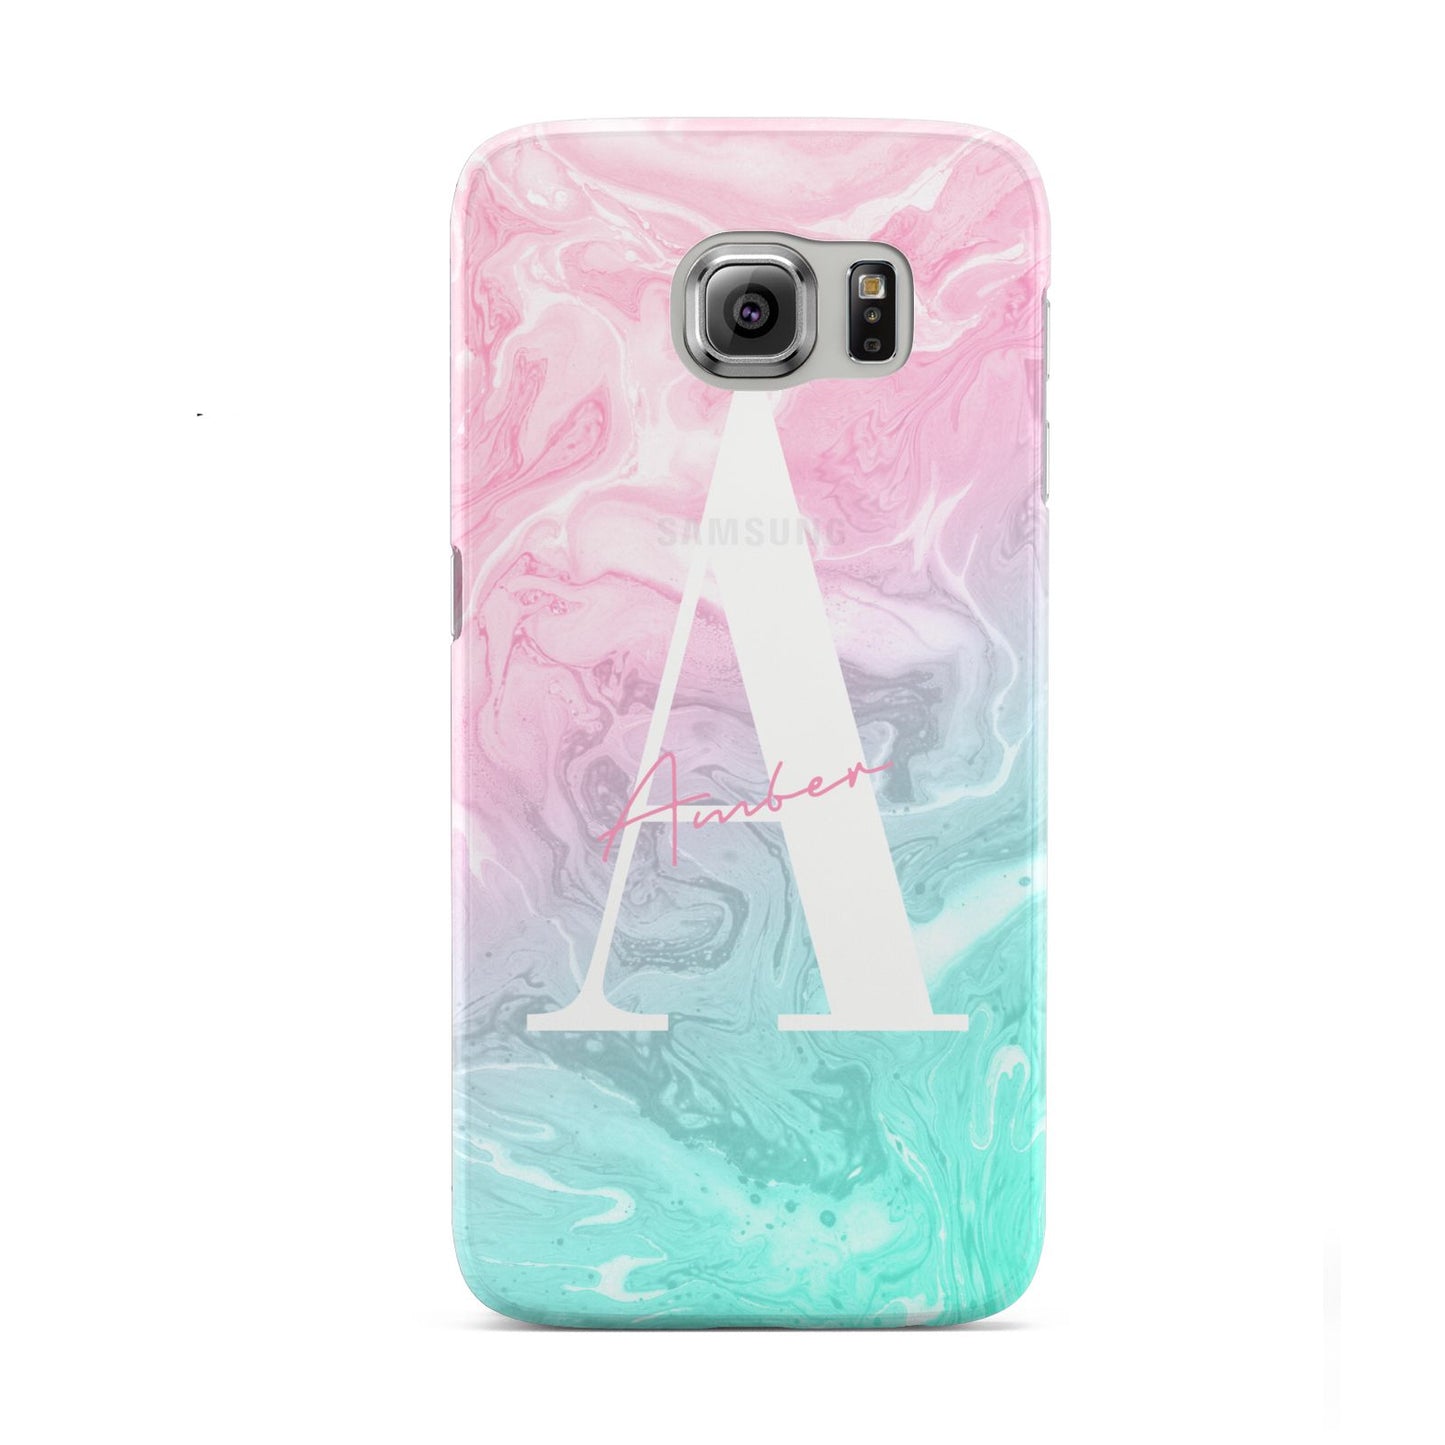 Monogrammed Pink Turquoise Pastel Marble Samsung Galaxy S6 Case